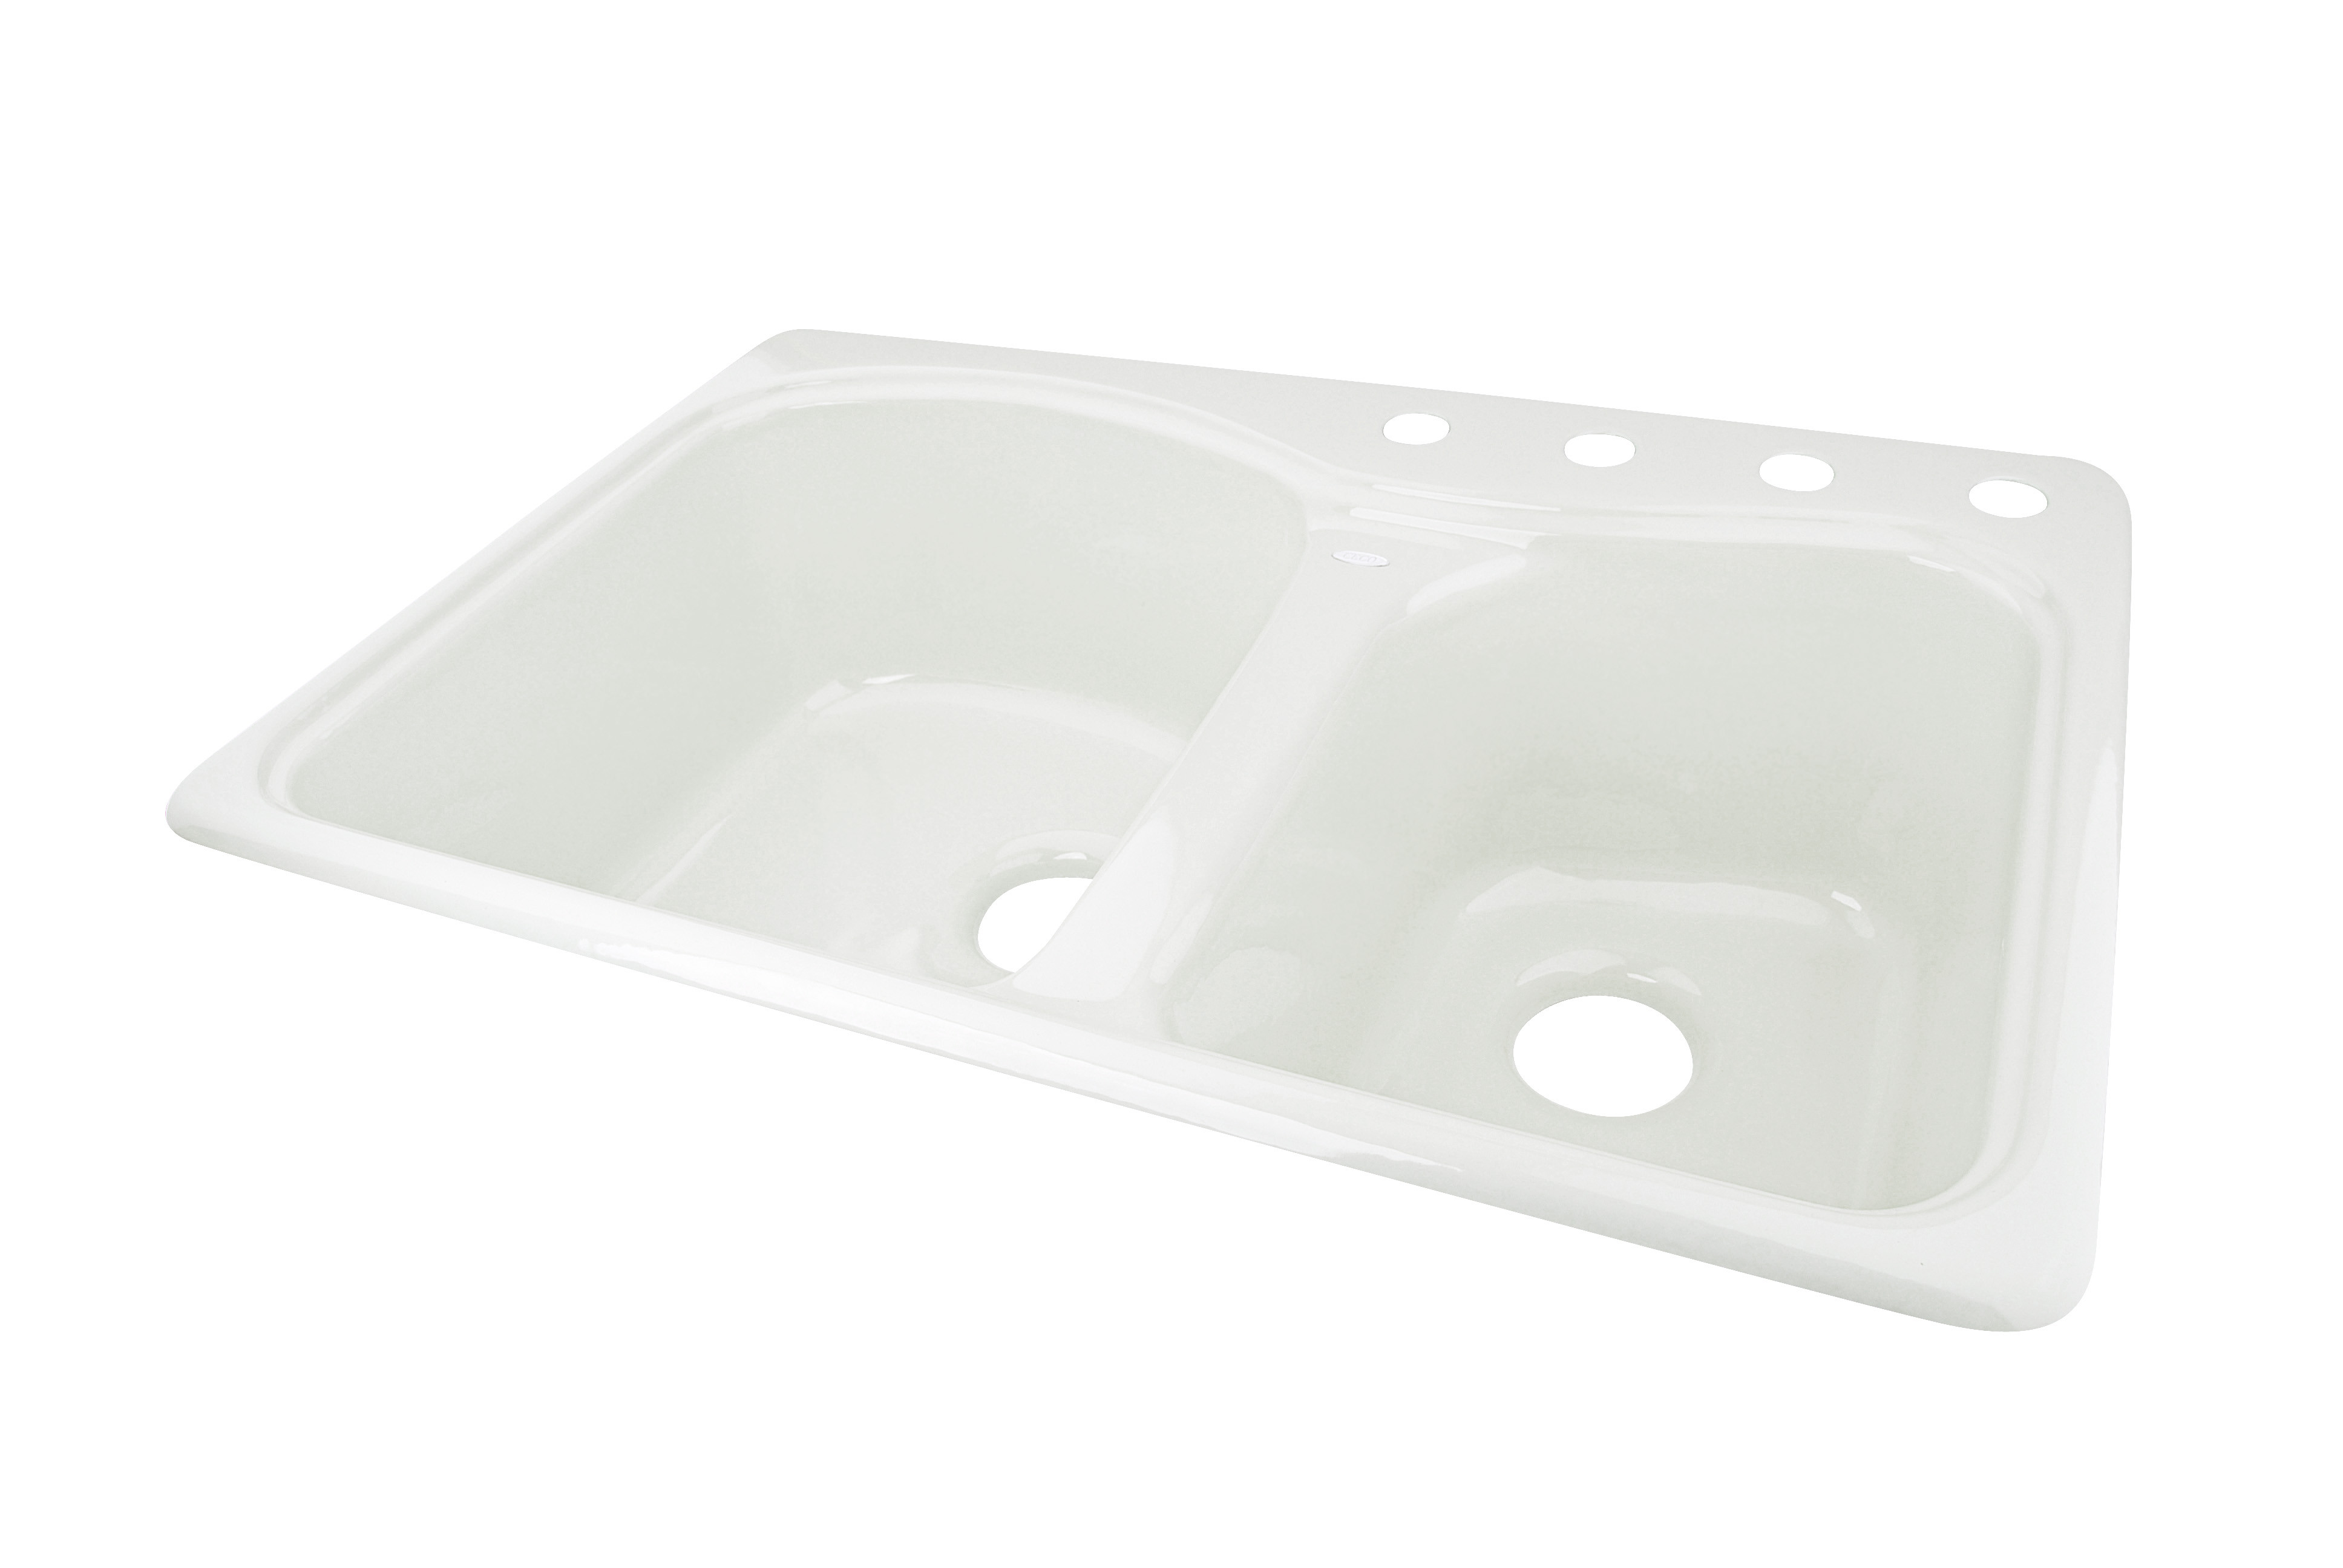 CECO 775-4 Extra Deep 33'' x 22'' Self-Rimming Heavy Cast Iron Kitchen Sink